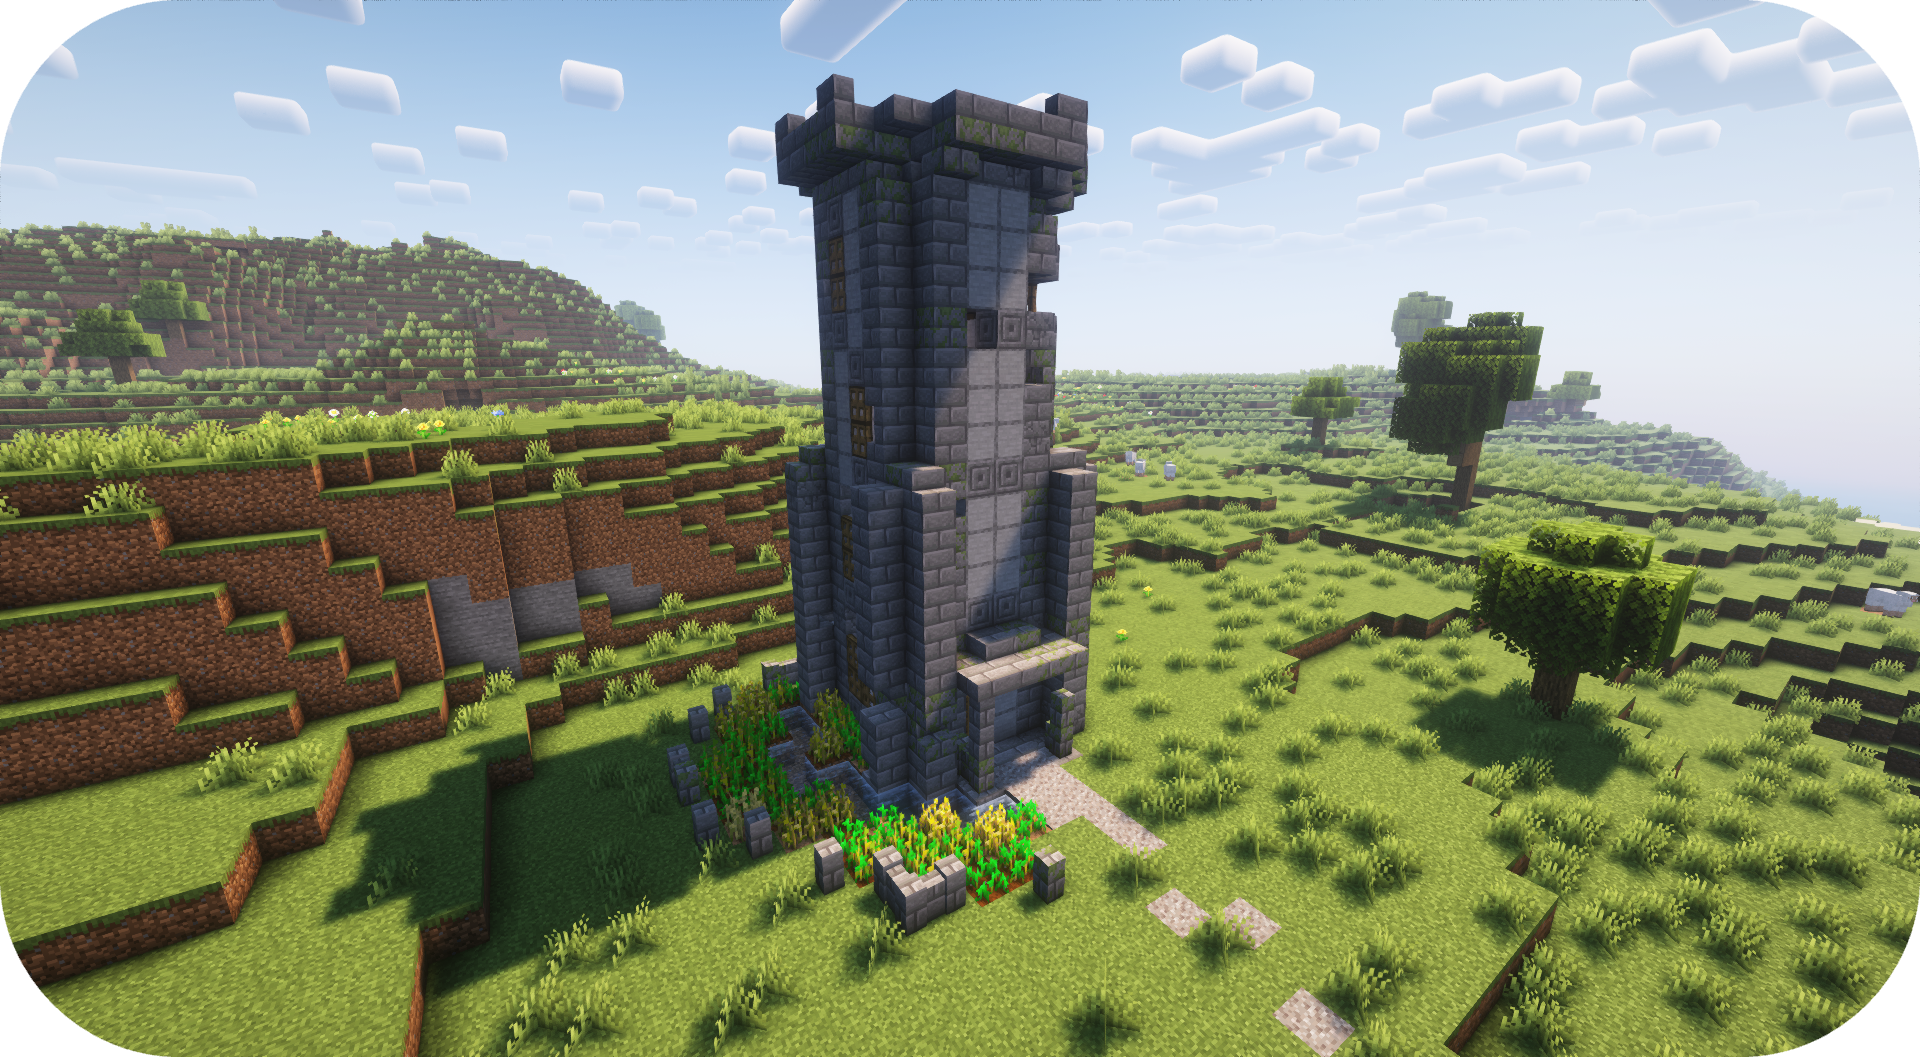 Degrading tower with some farmland